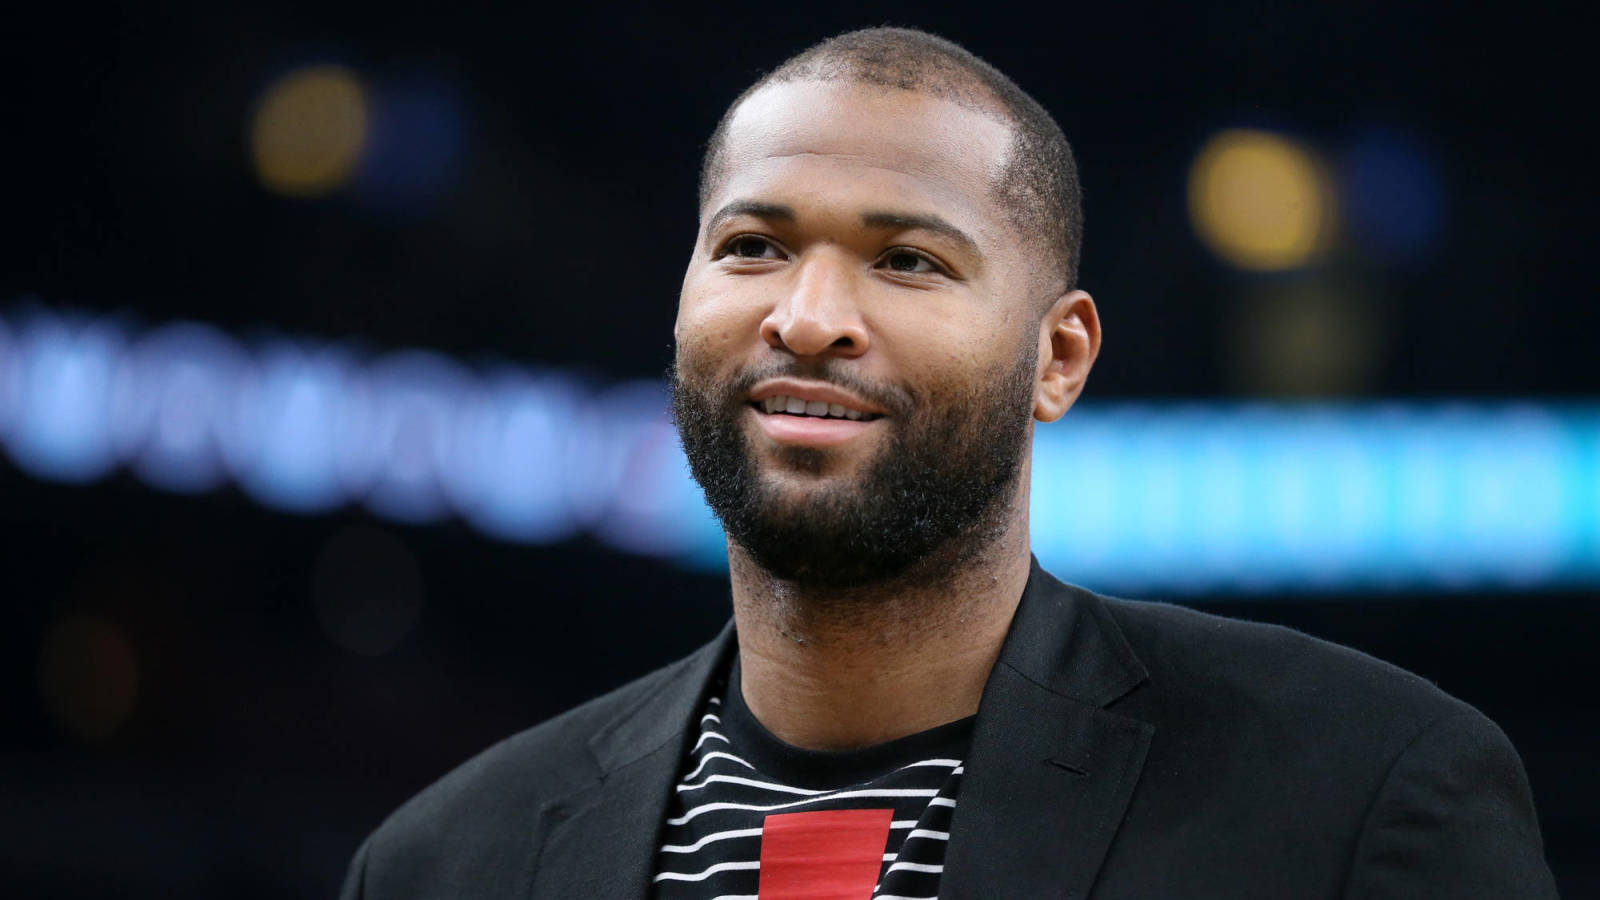 DeMarcus Cousins excited to reunite with John Wall in Houston | Yardbarker